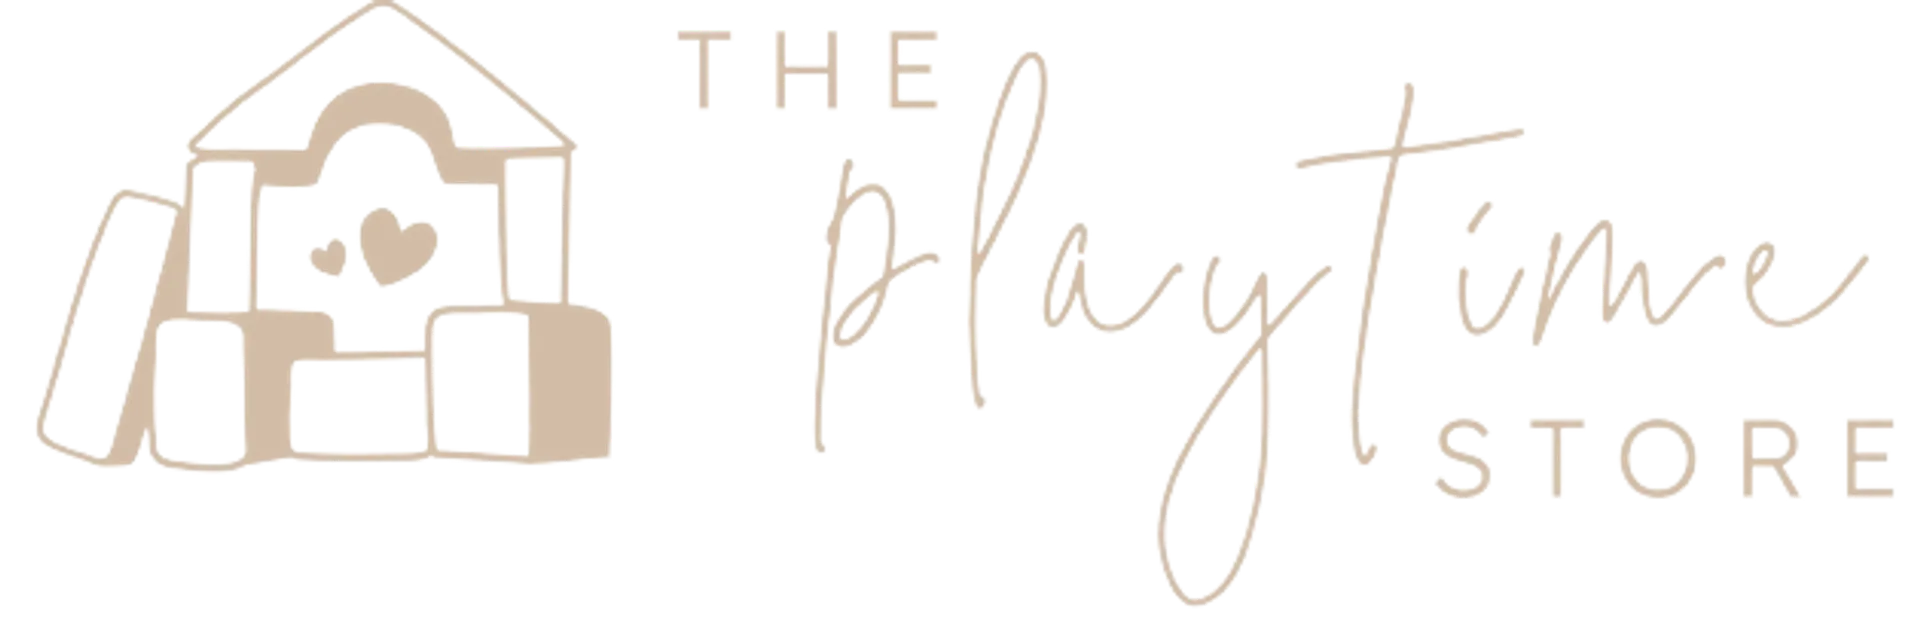 THE PLAYTIME STORE logo